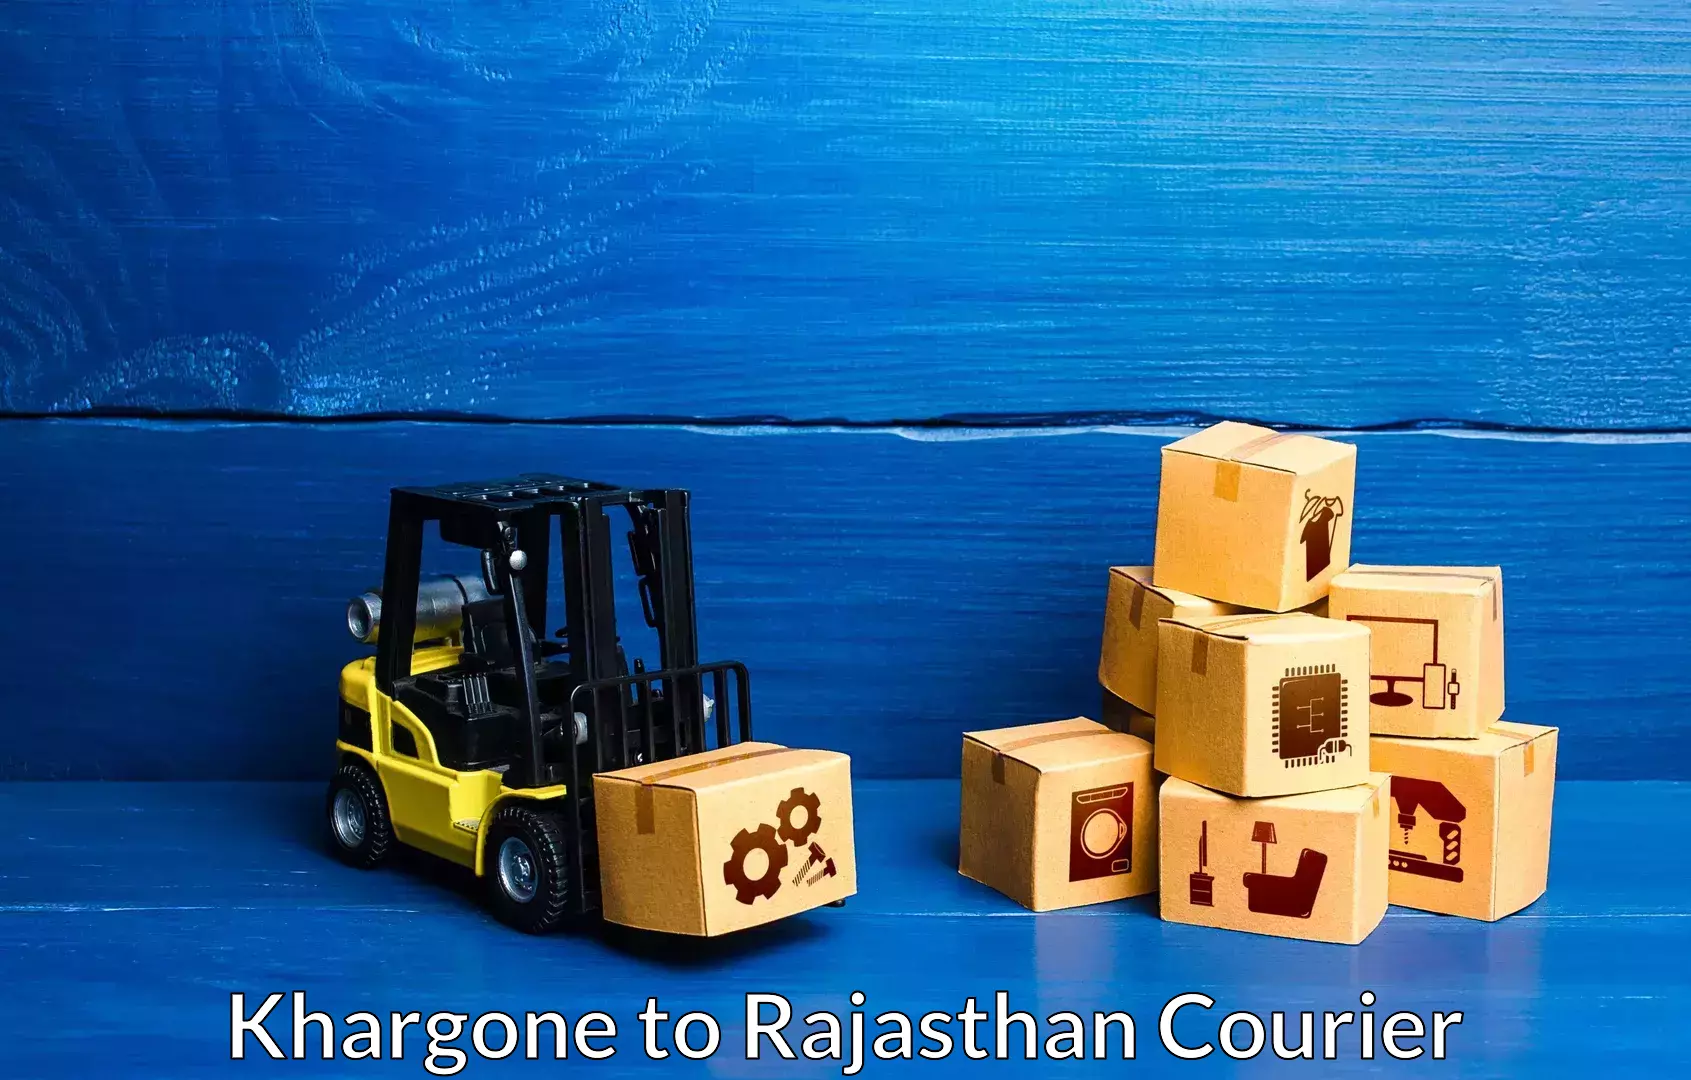 Furniture delivery service Khargone to Alwar